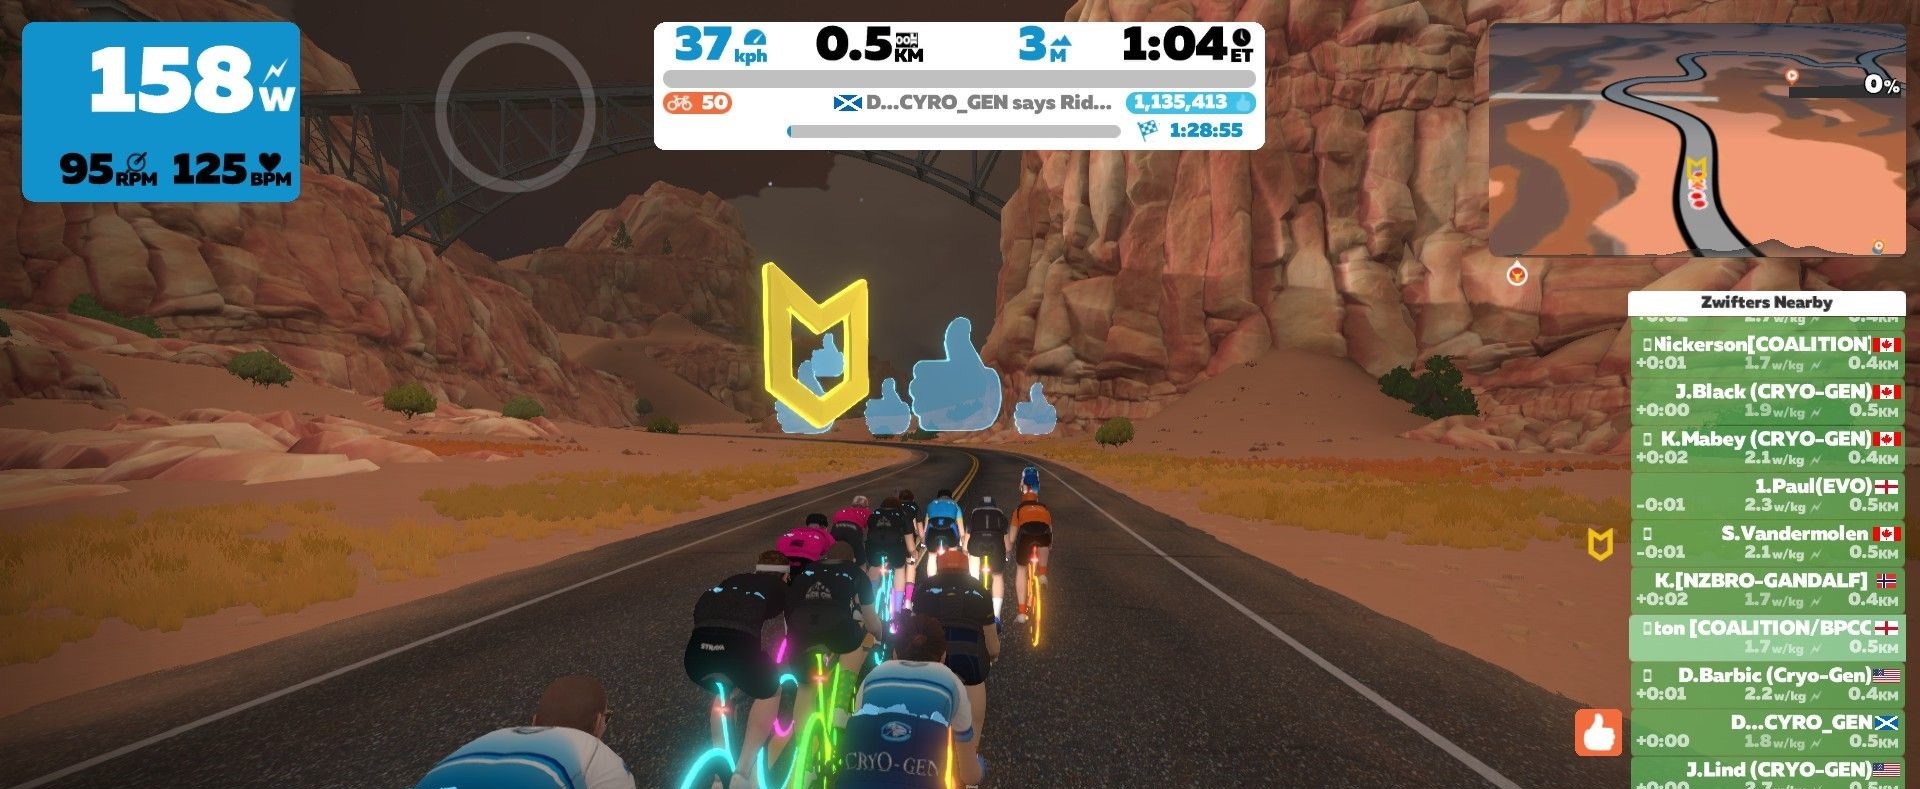 Indoor training and the virtual world of Zwift